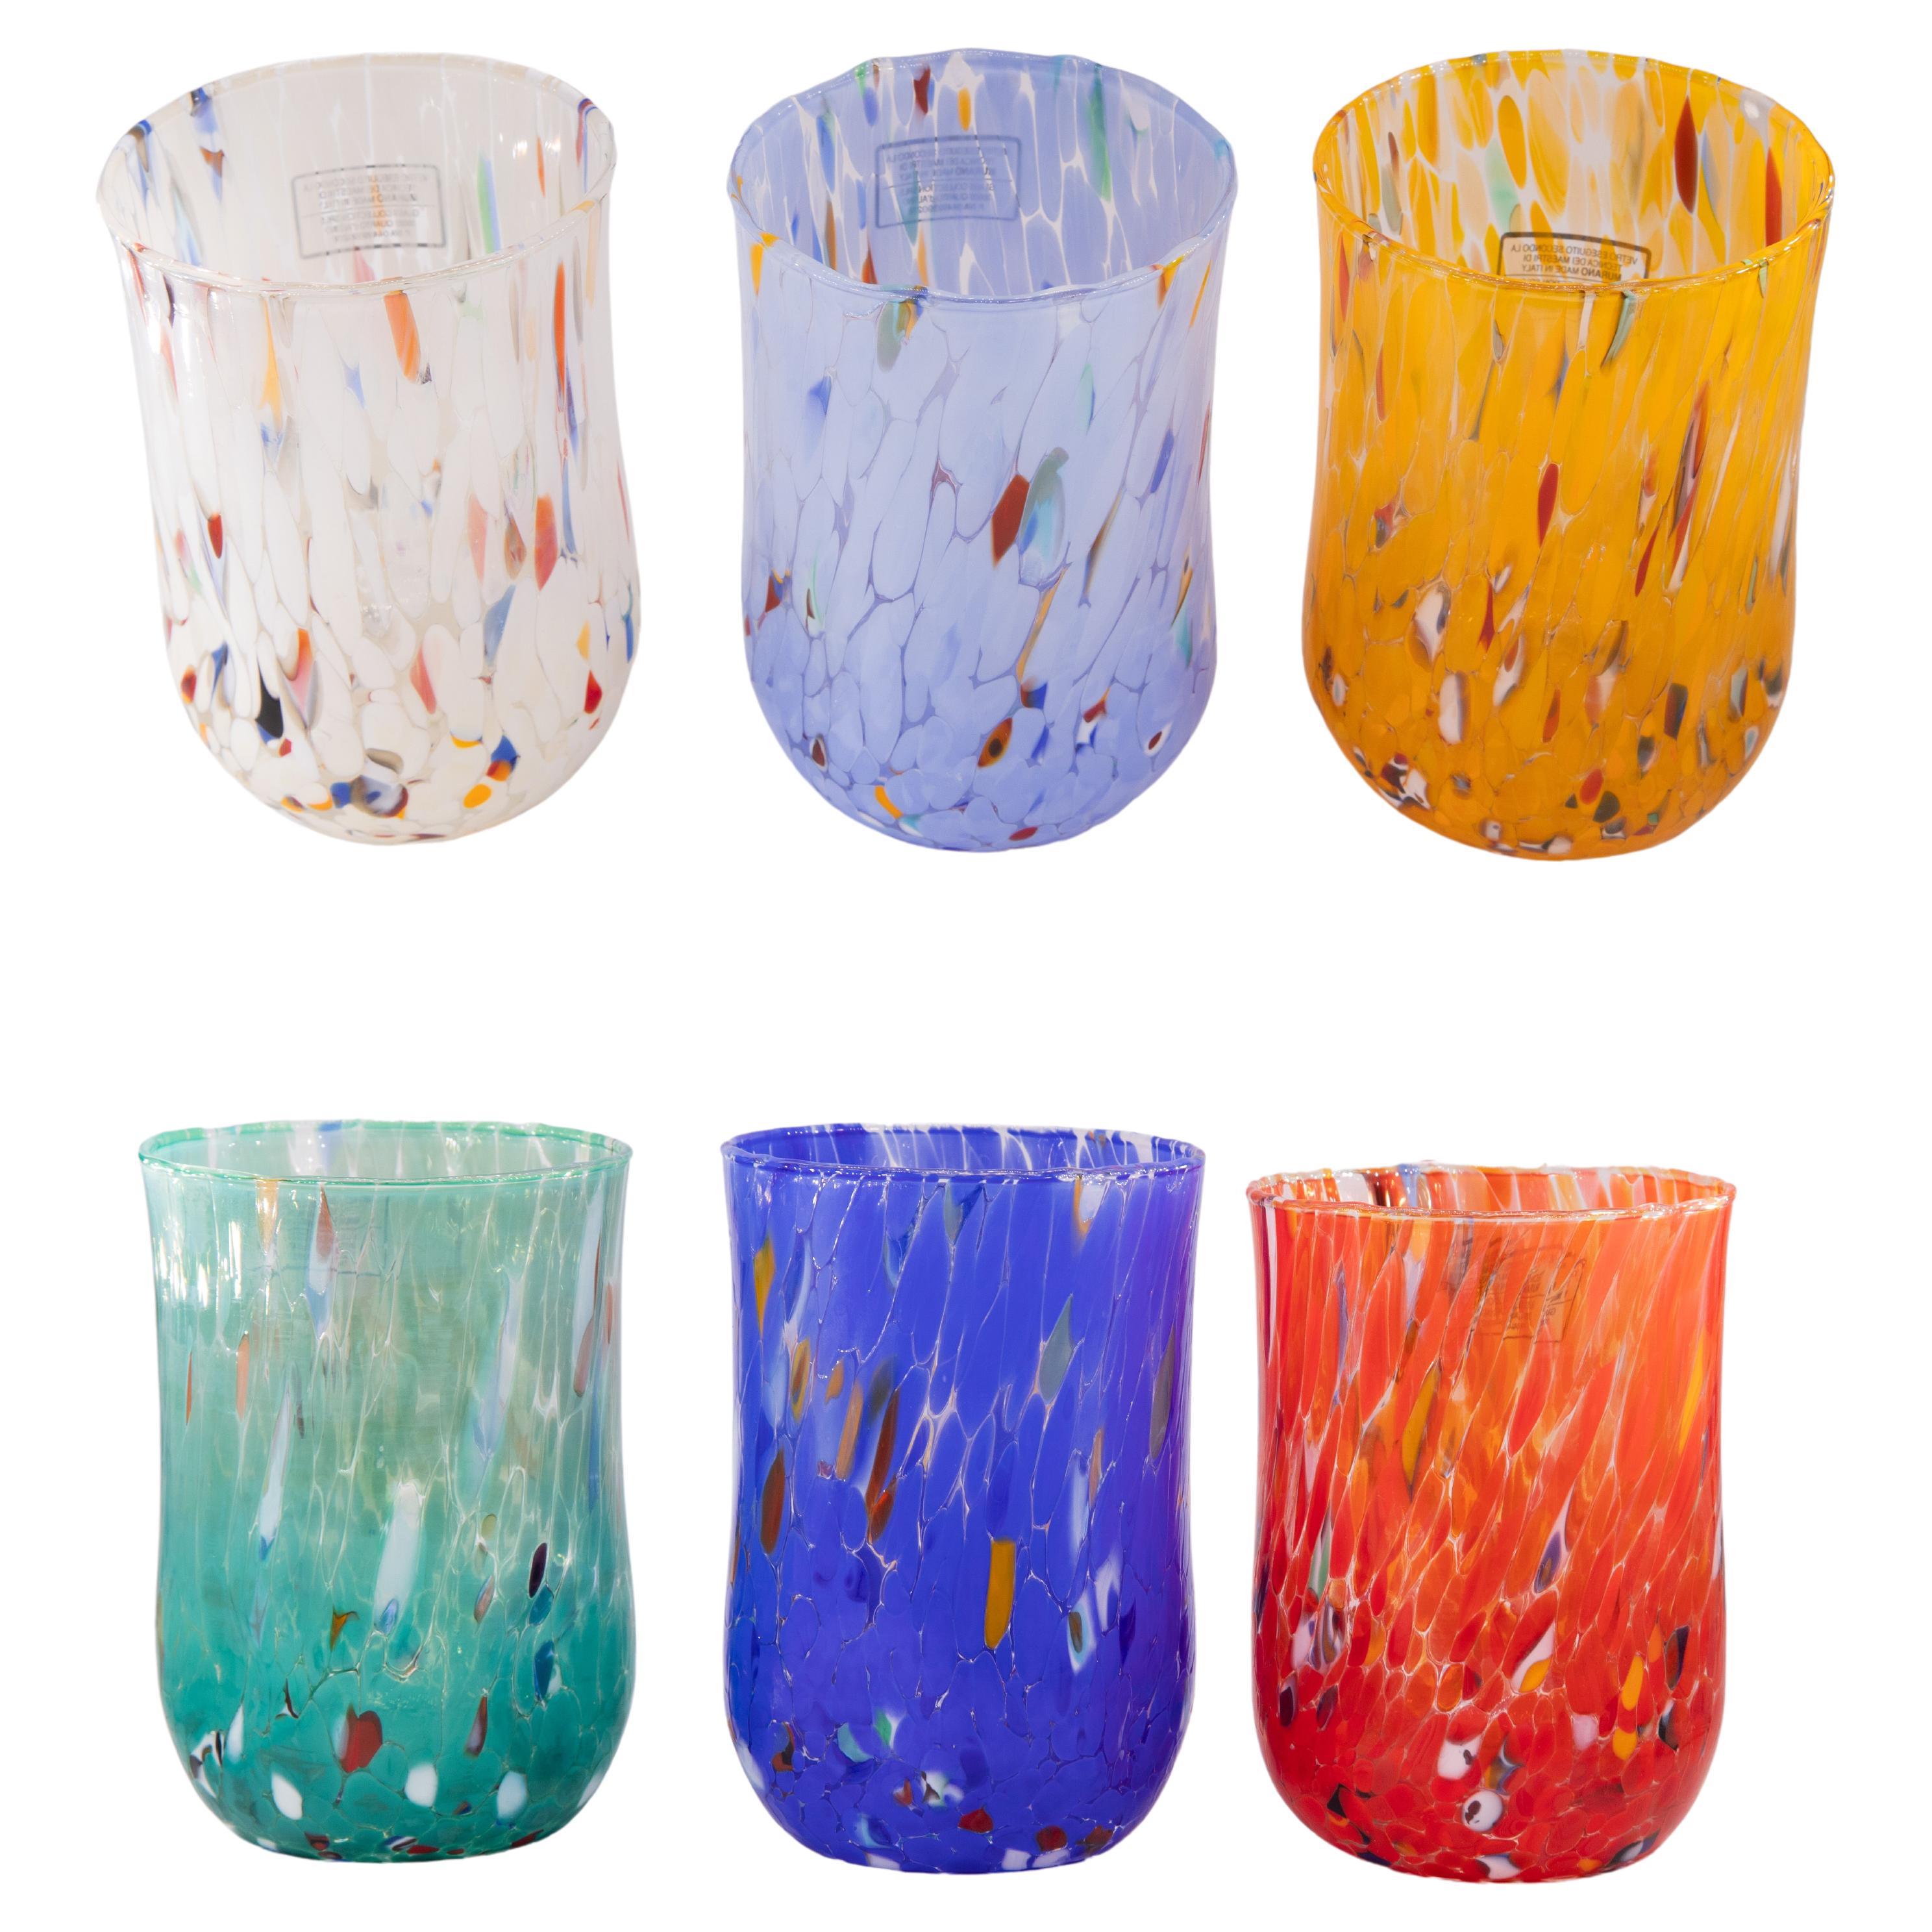 Panamá City, Set of 6 Murano Drink\water Glasses Color "Multicolor" Handmade